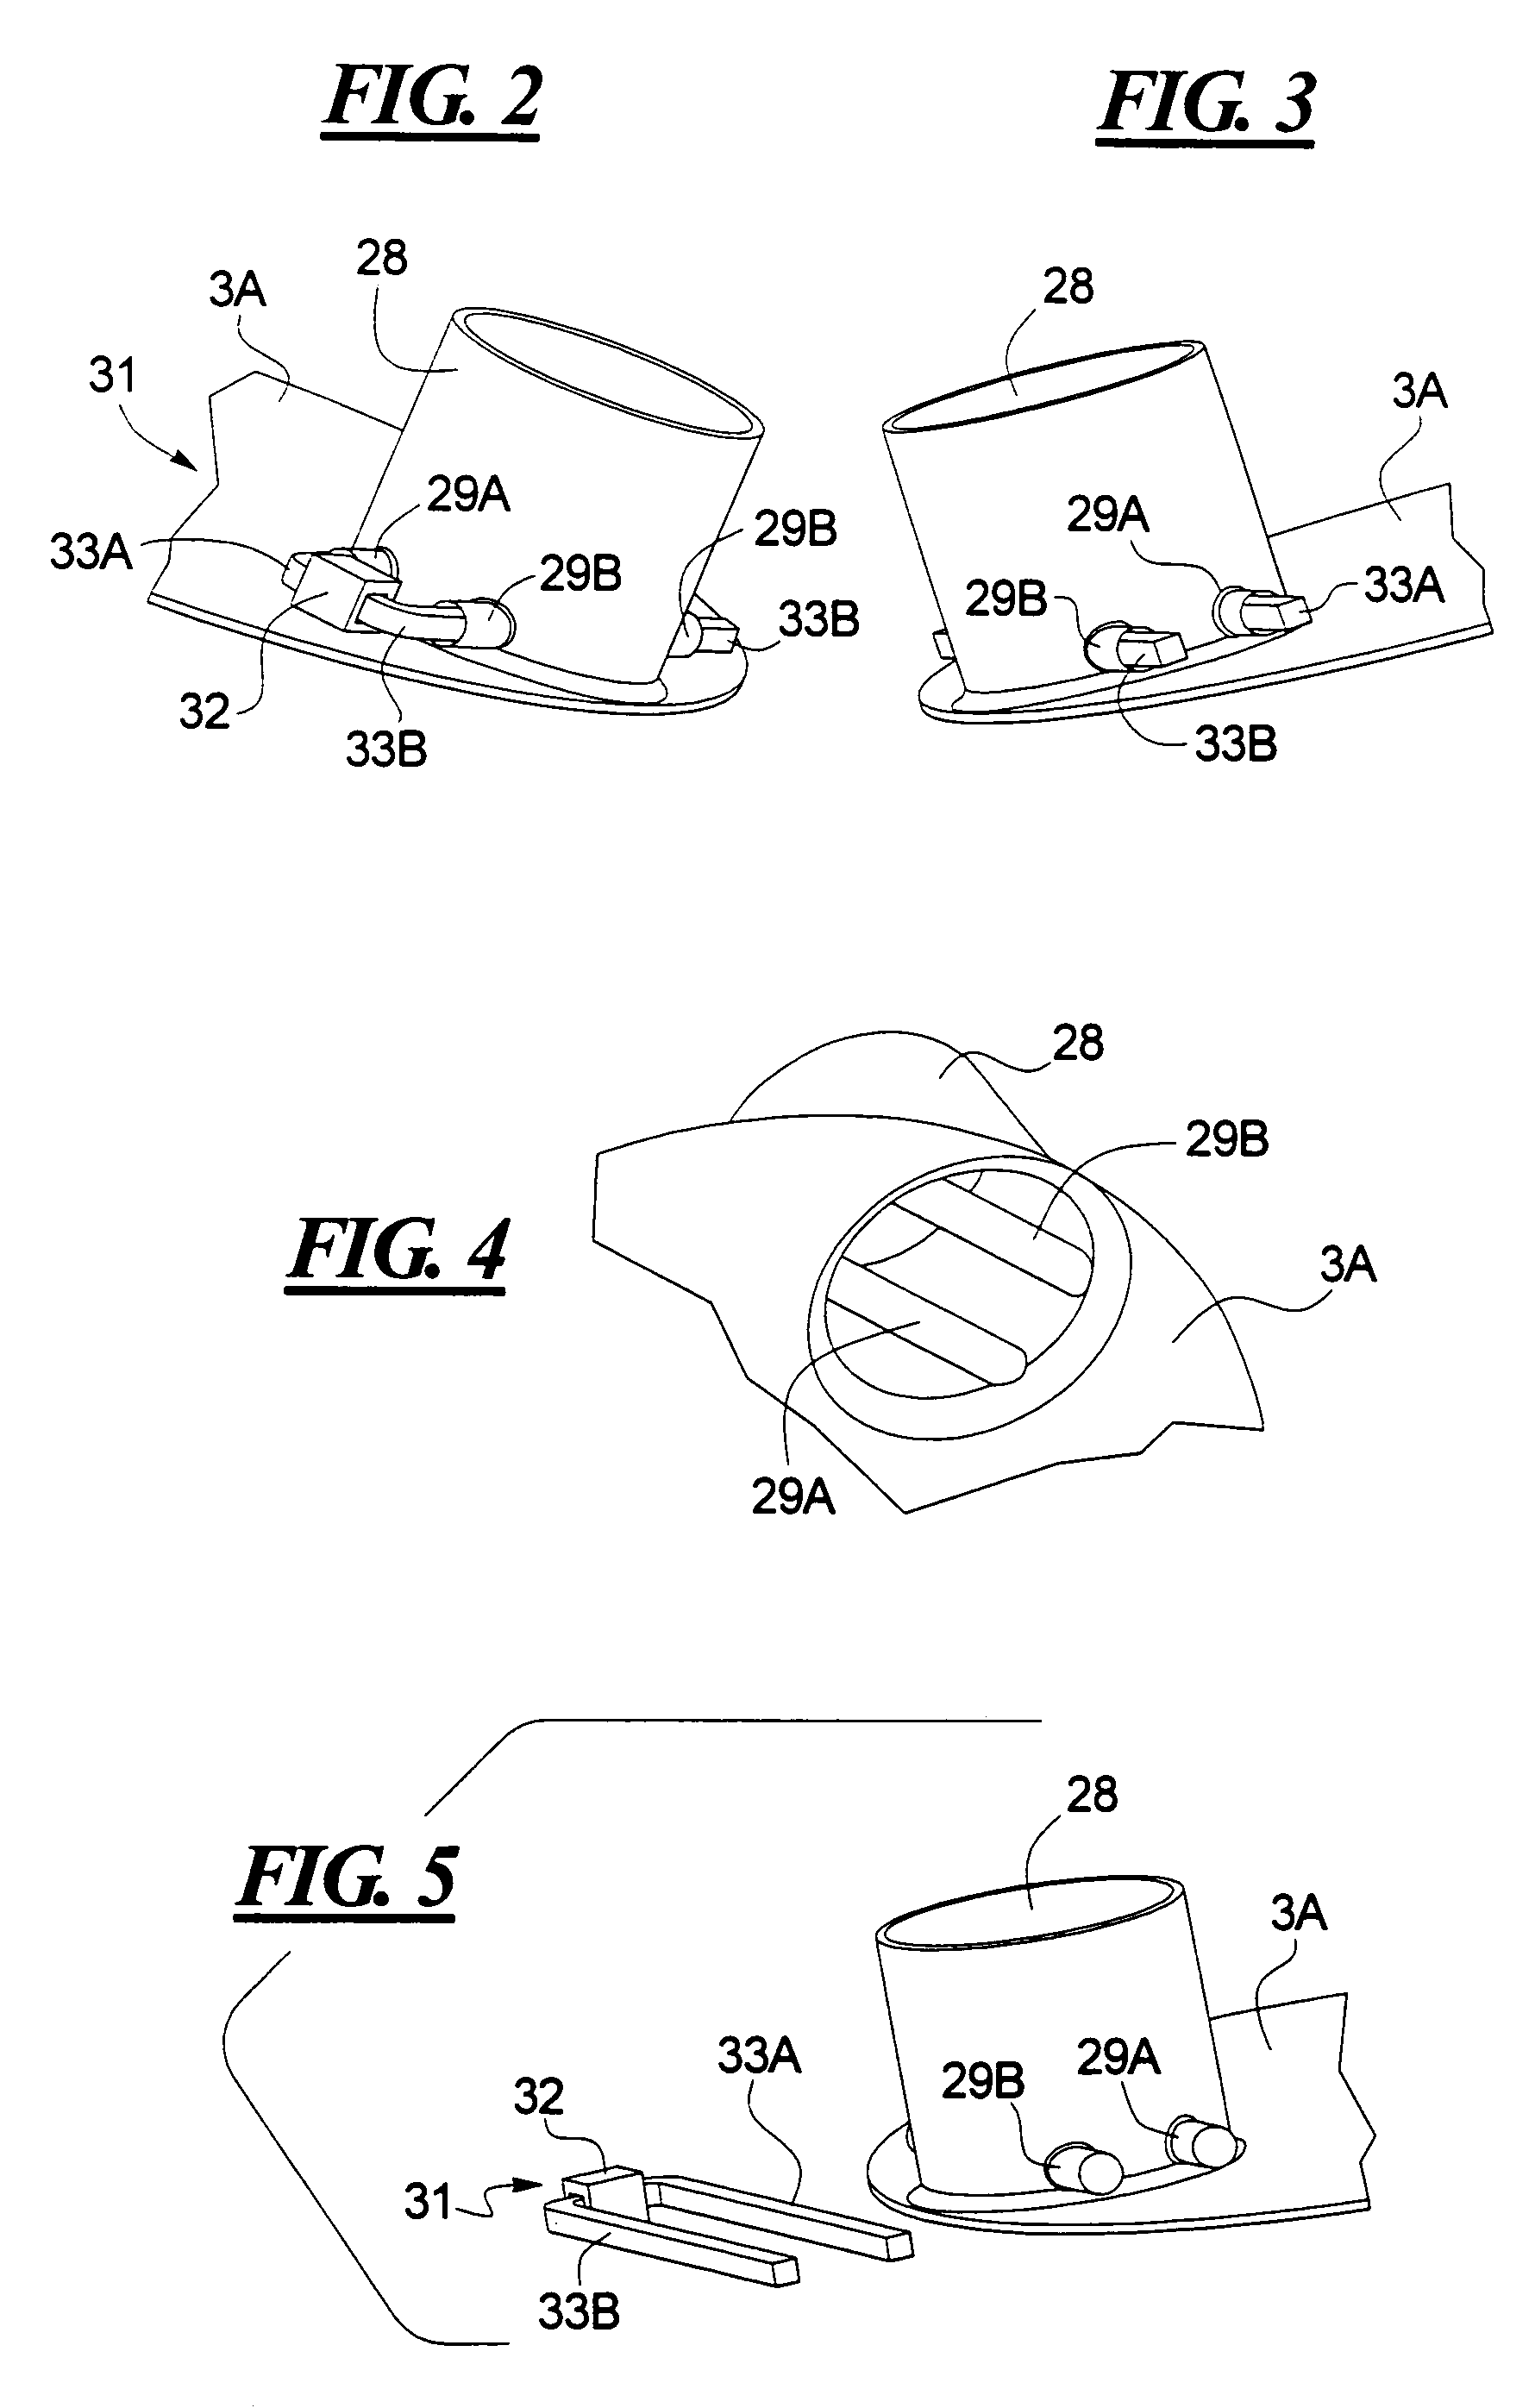 X-ray tube with housing adapted to receive and hold an electron beam deflector